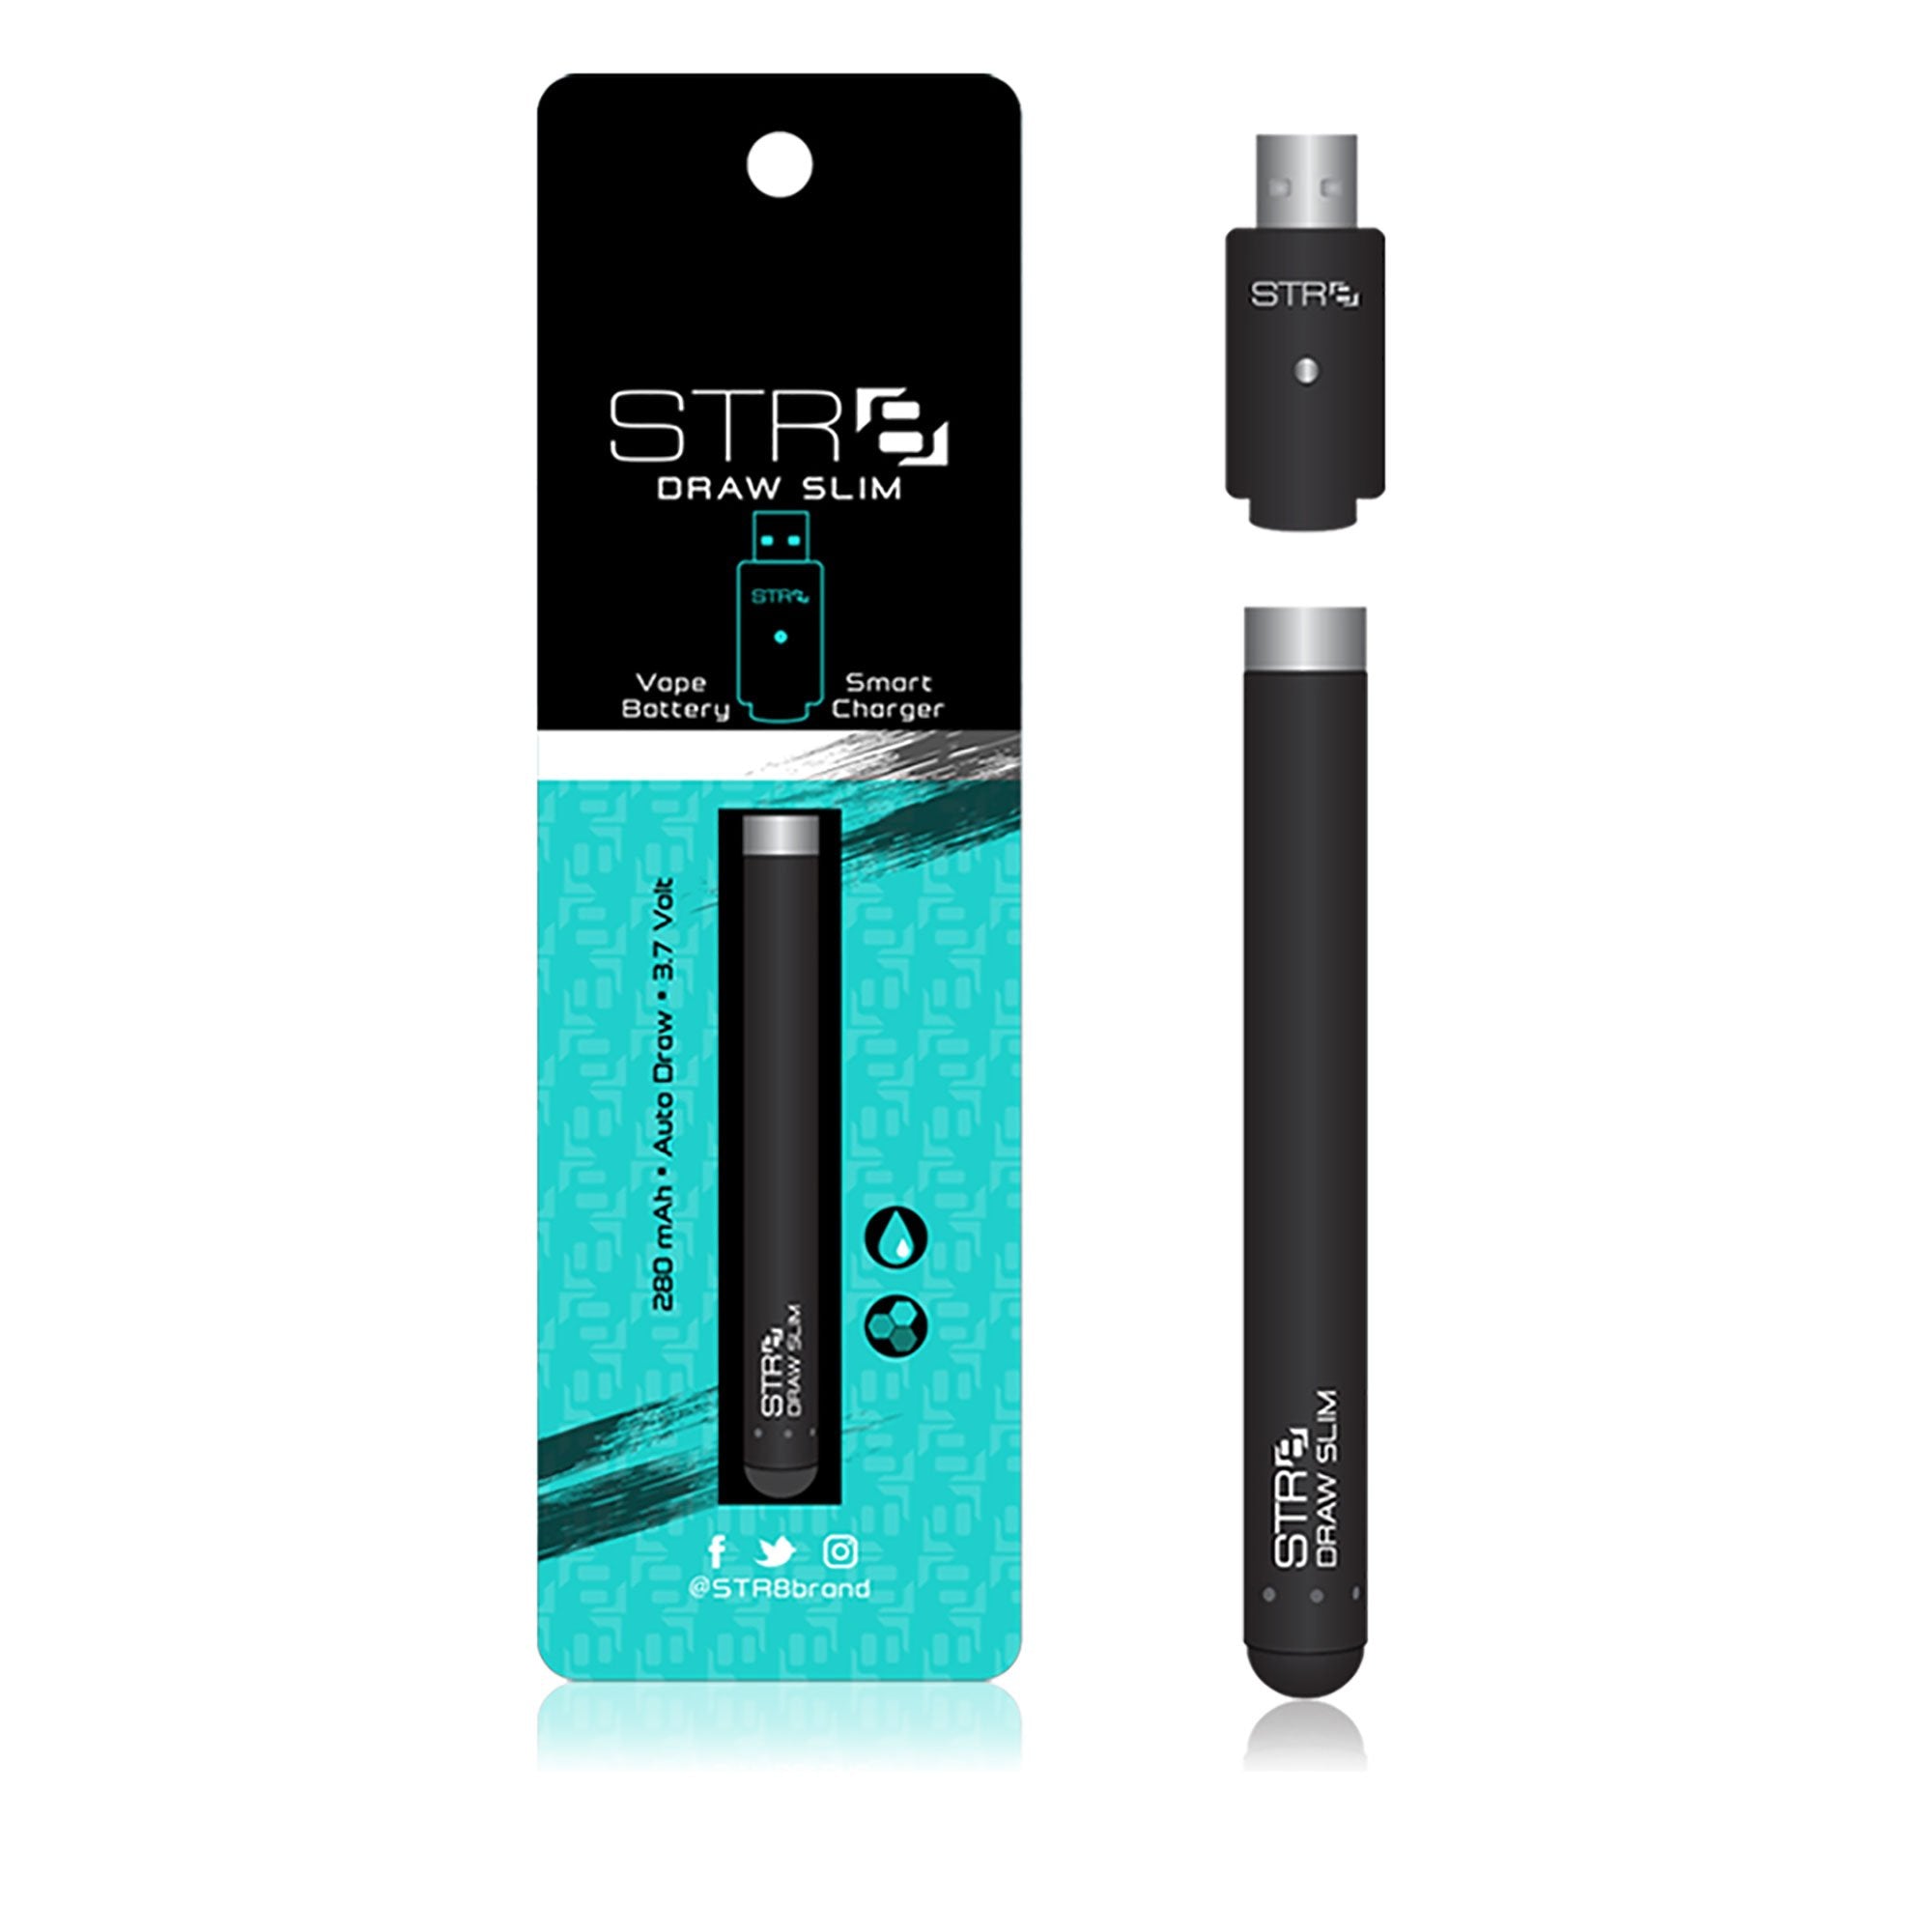 STR8 | Auto Draw Slim Vape Batteries with Charger | 280mAh - Black - 10 Count - 2